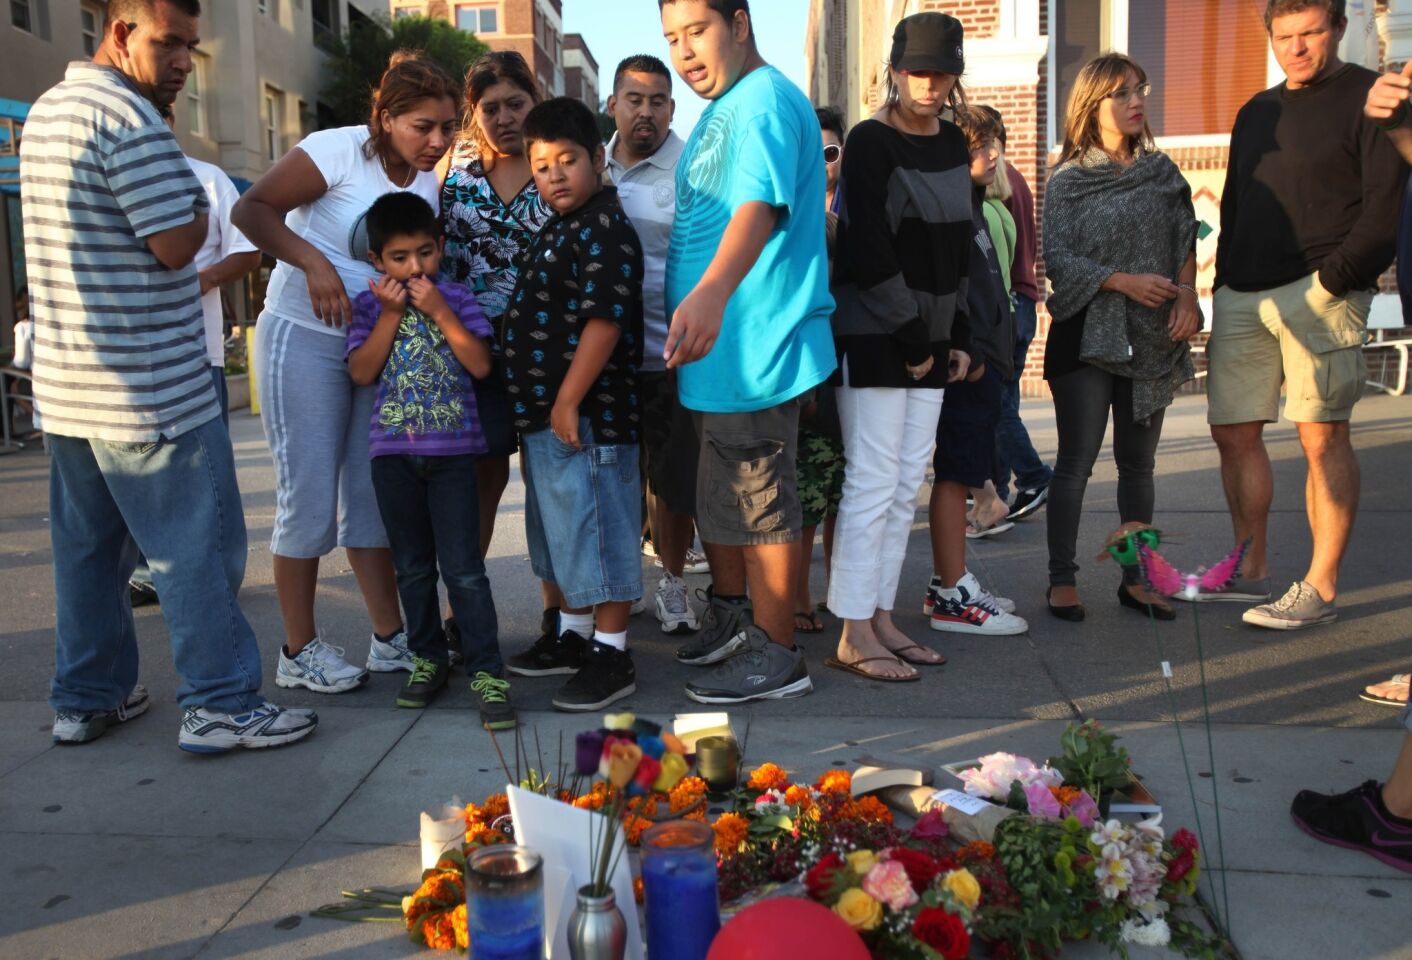 Visitors leave flowers and pay their respects at a memorial on the Venice boardwalk.